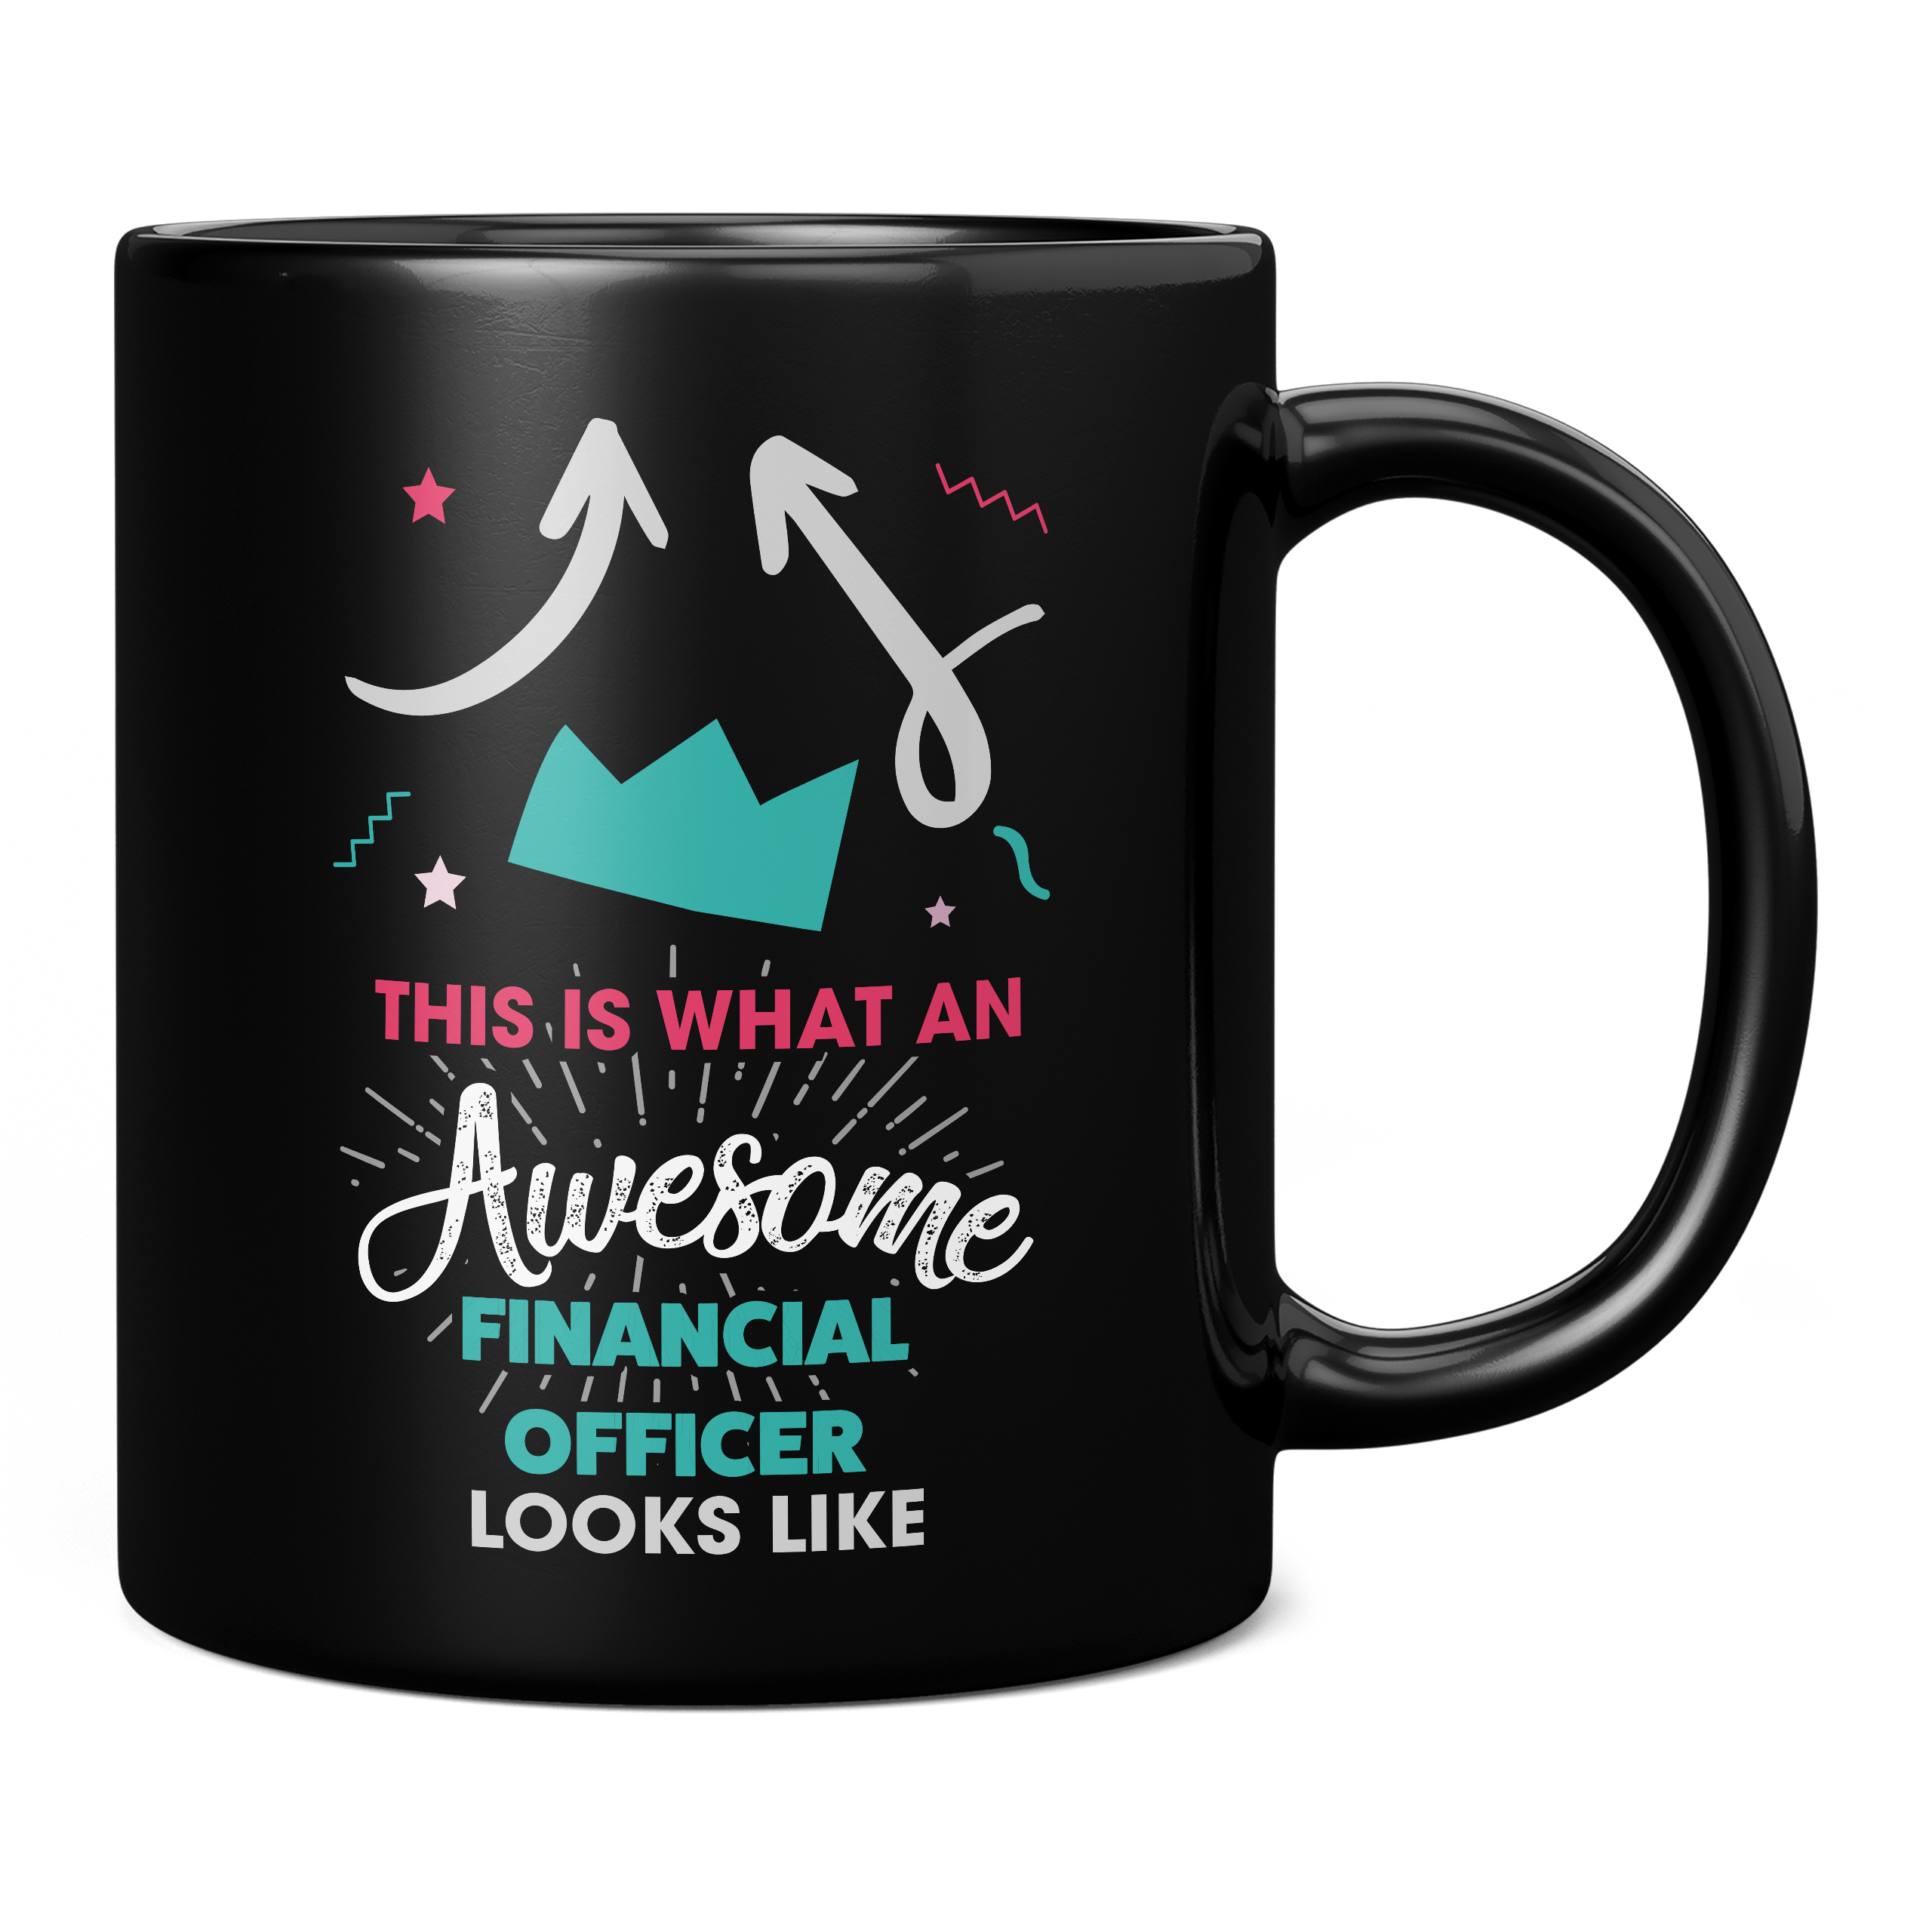 THIS IS WHAT AN AWESOME FINANCIAL OFFICER LOOKS LIKE 11OZ NOVELTY MUG